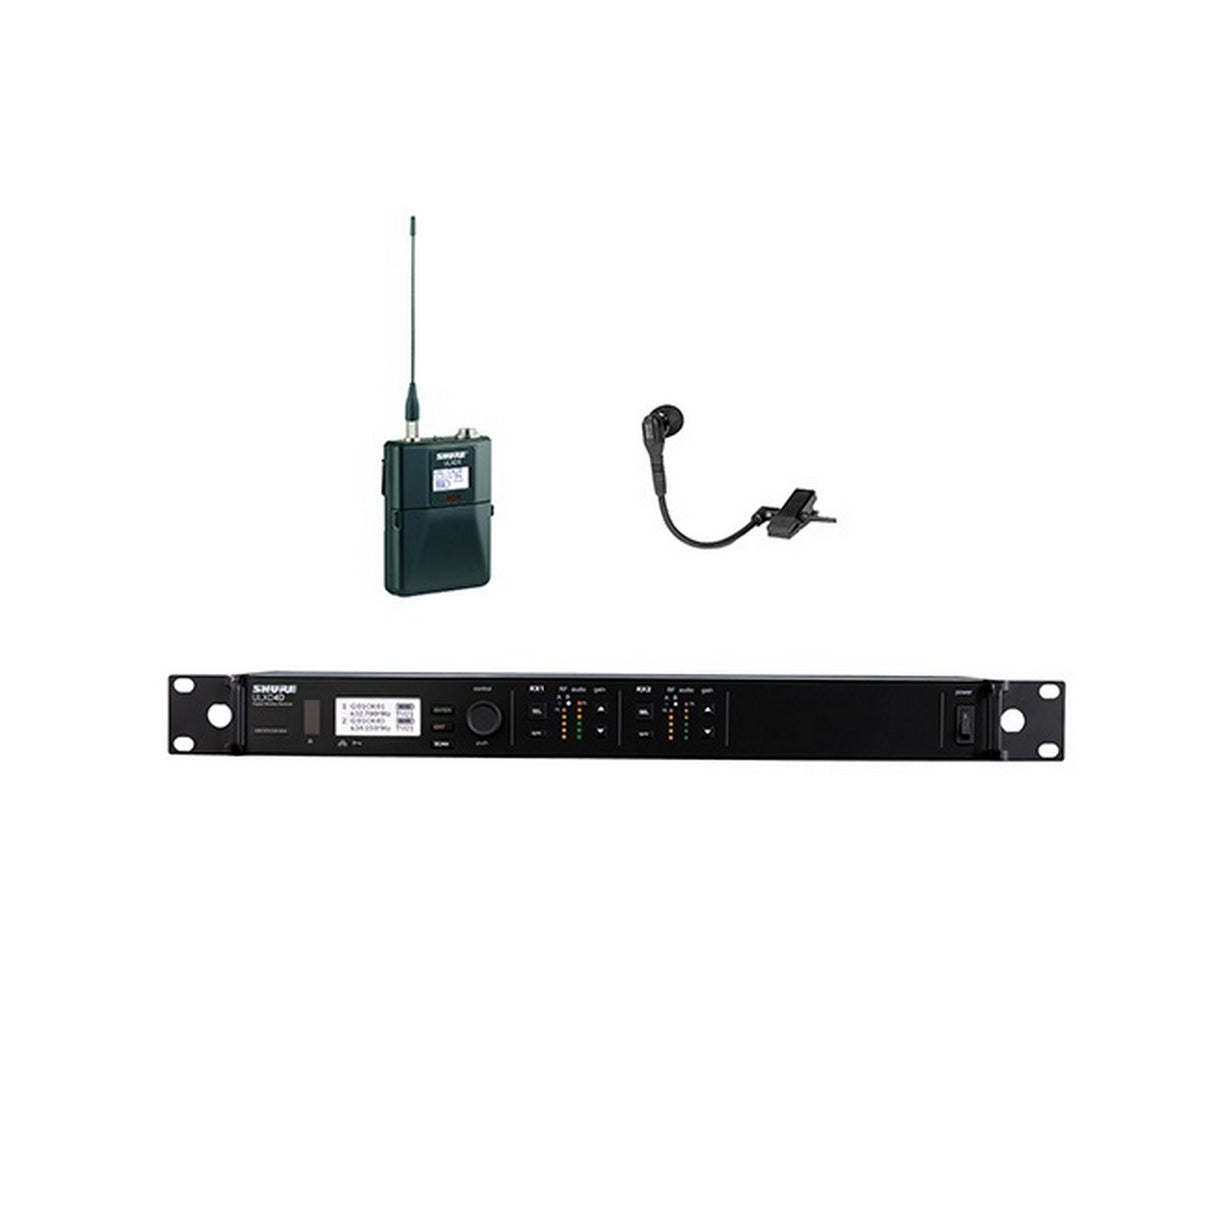 Shure ULXD14D/WB98HC BETA 98H/C Clip-On Instrument Wireless Microphone System, H50 534-598 MHz